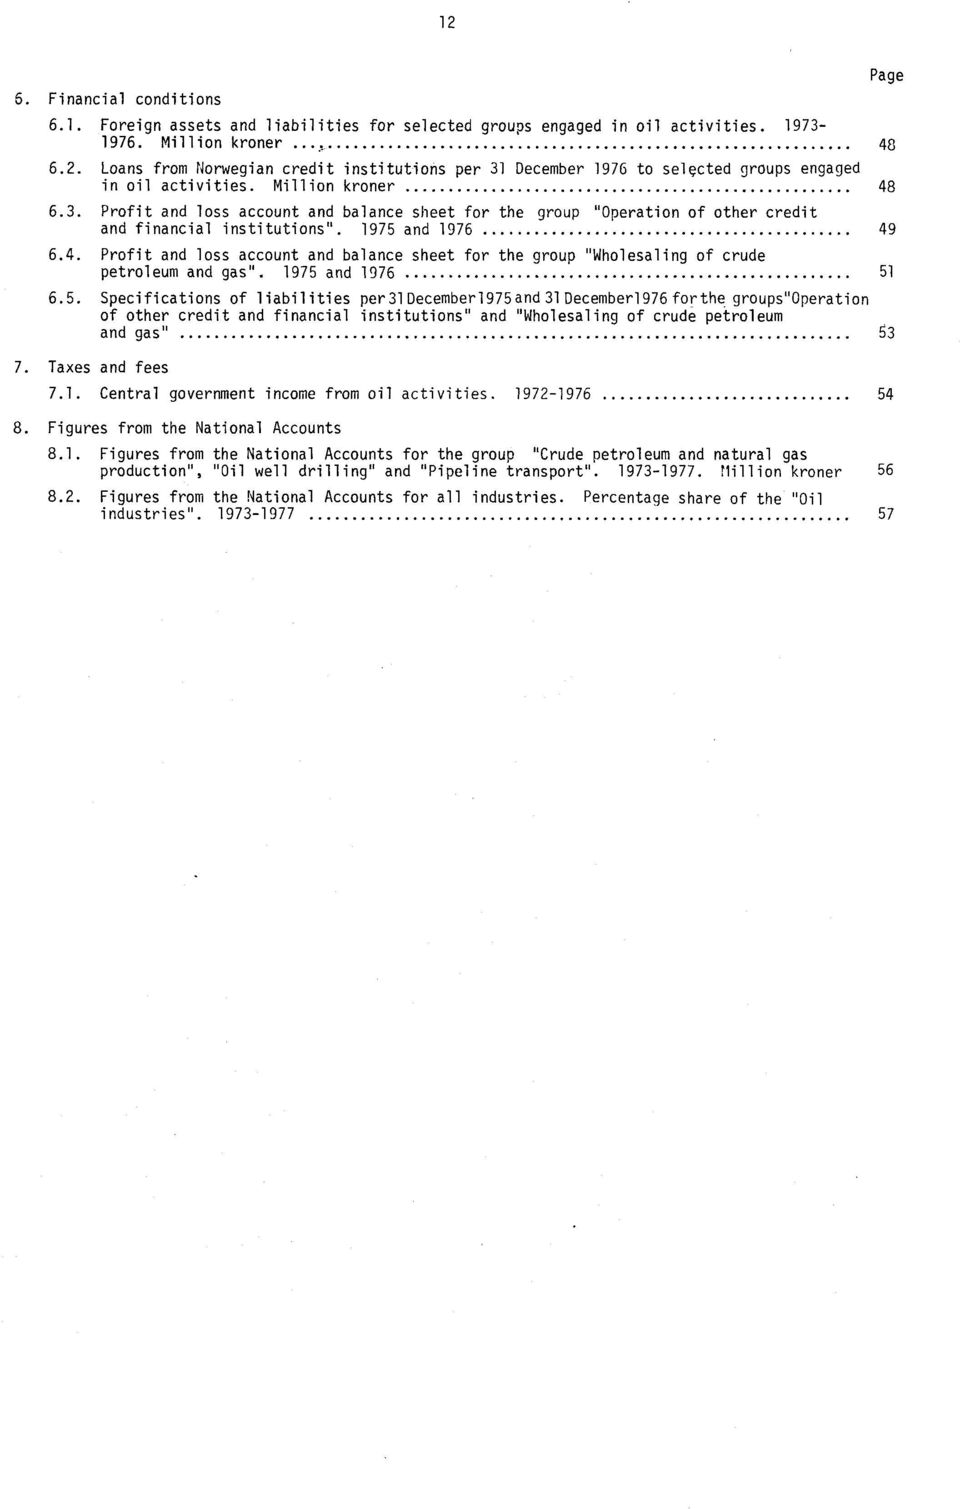 1975 and 1976 51 6.5. Specifications of liabilities per31 December1975and 31 December1976forthe groups"operation of other credit and financial institutions" and "Wholesaling of crude petroleum and gas" 53 7.